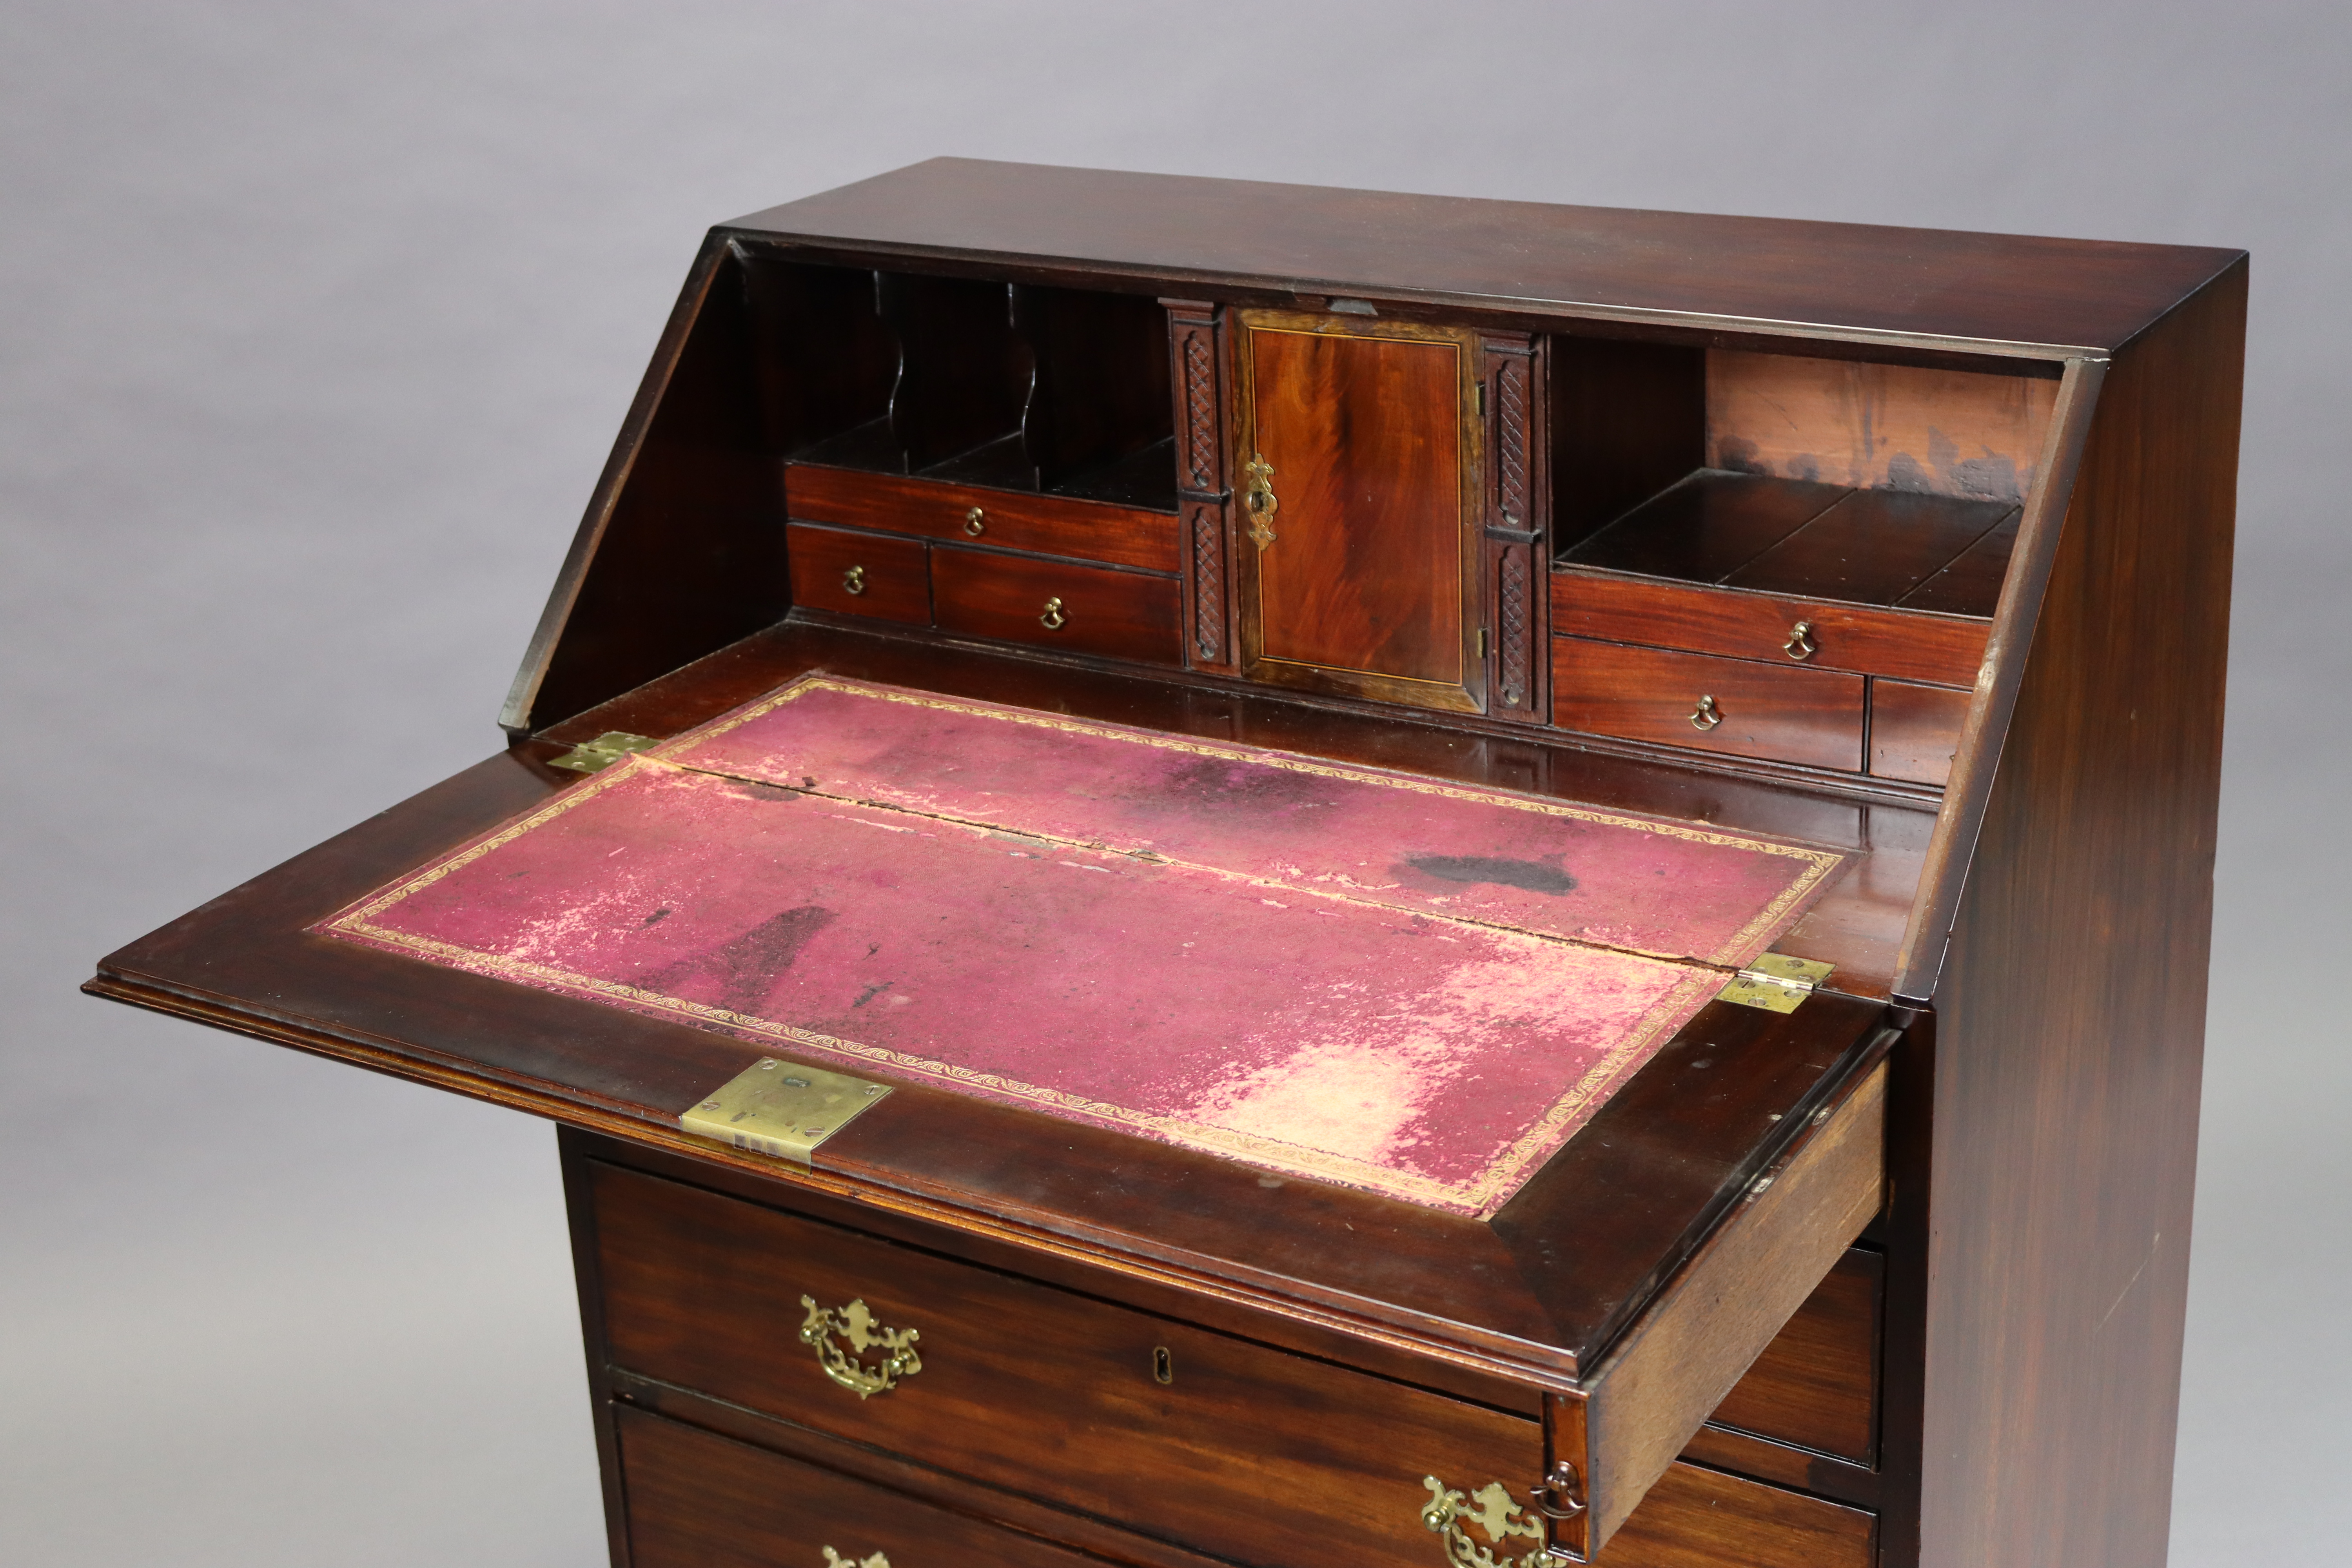 An 18th century mahogany bureau with fitted interior and gilt-tooled leather writing surface - Image 2 of 3